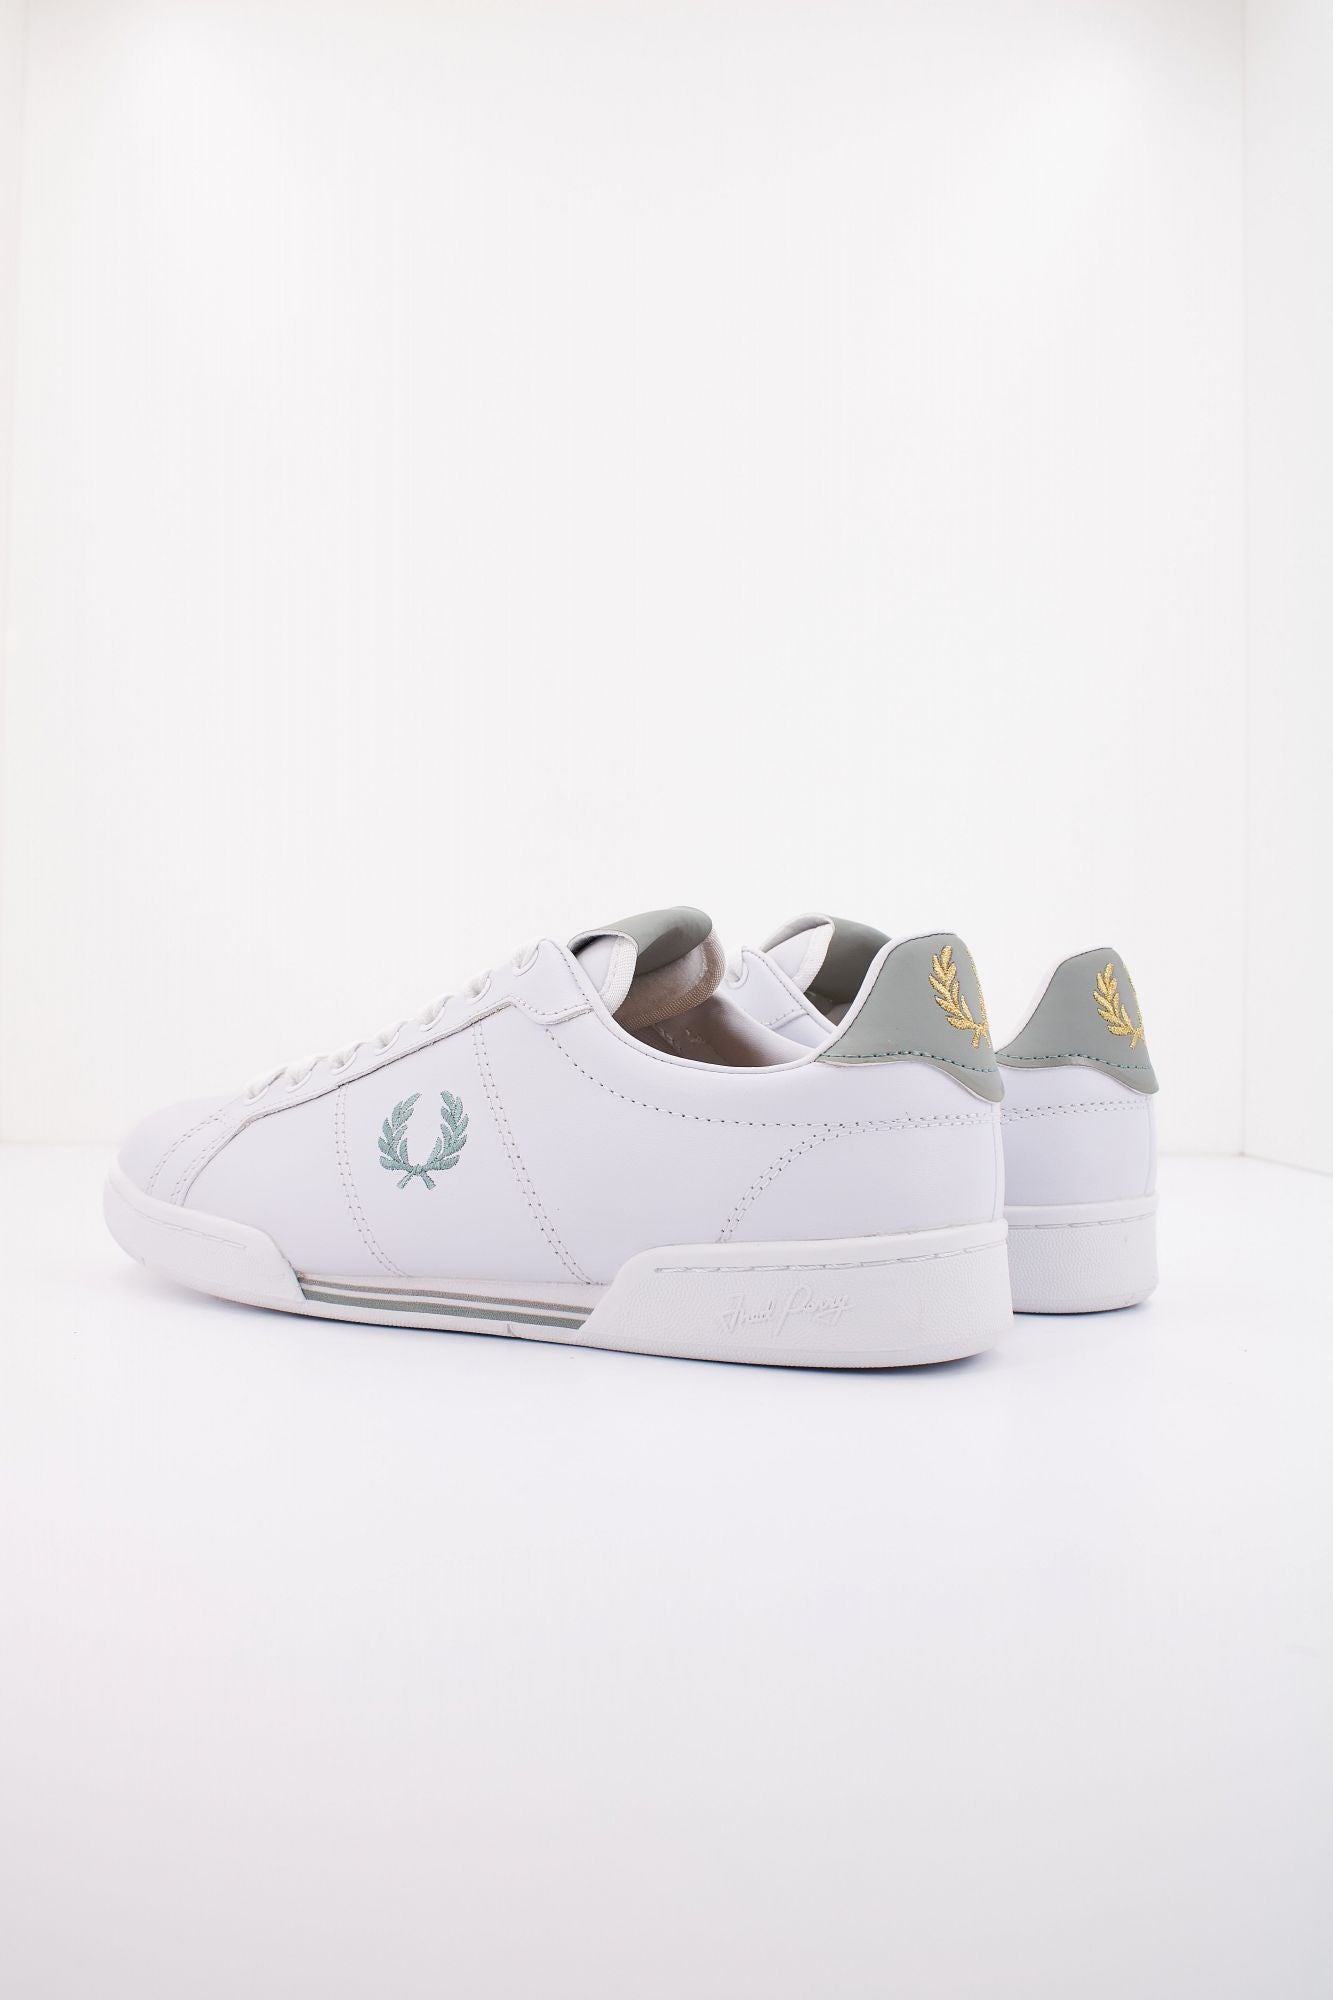 FRED PERRY B722 LEATHER en color BLANCO (3)